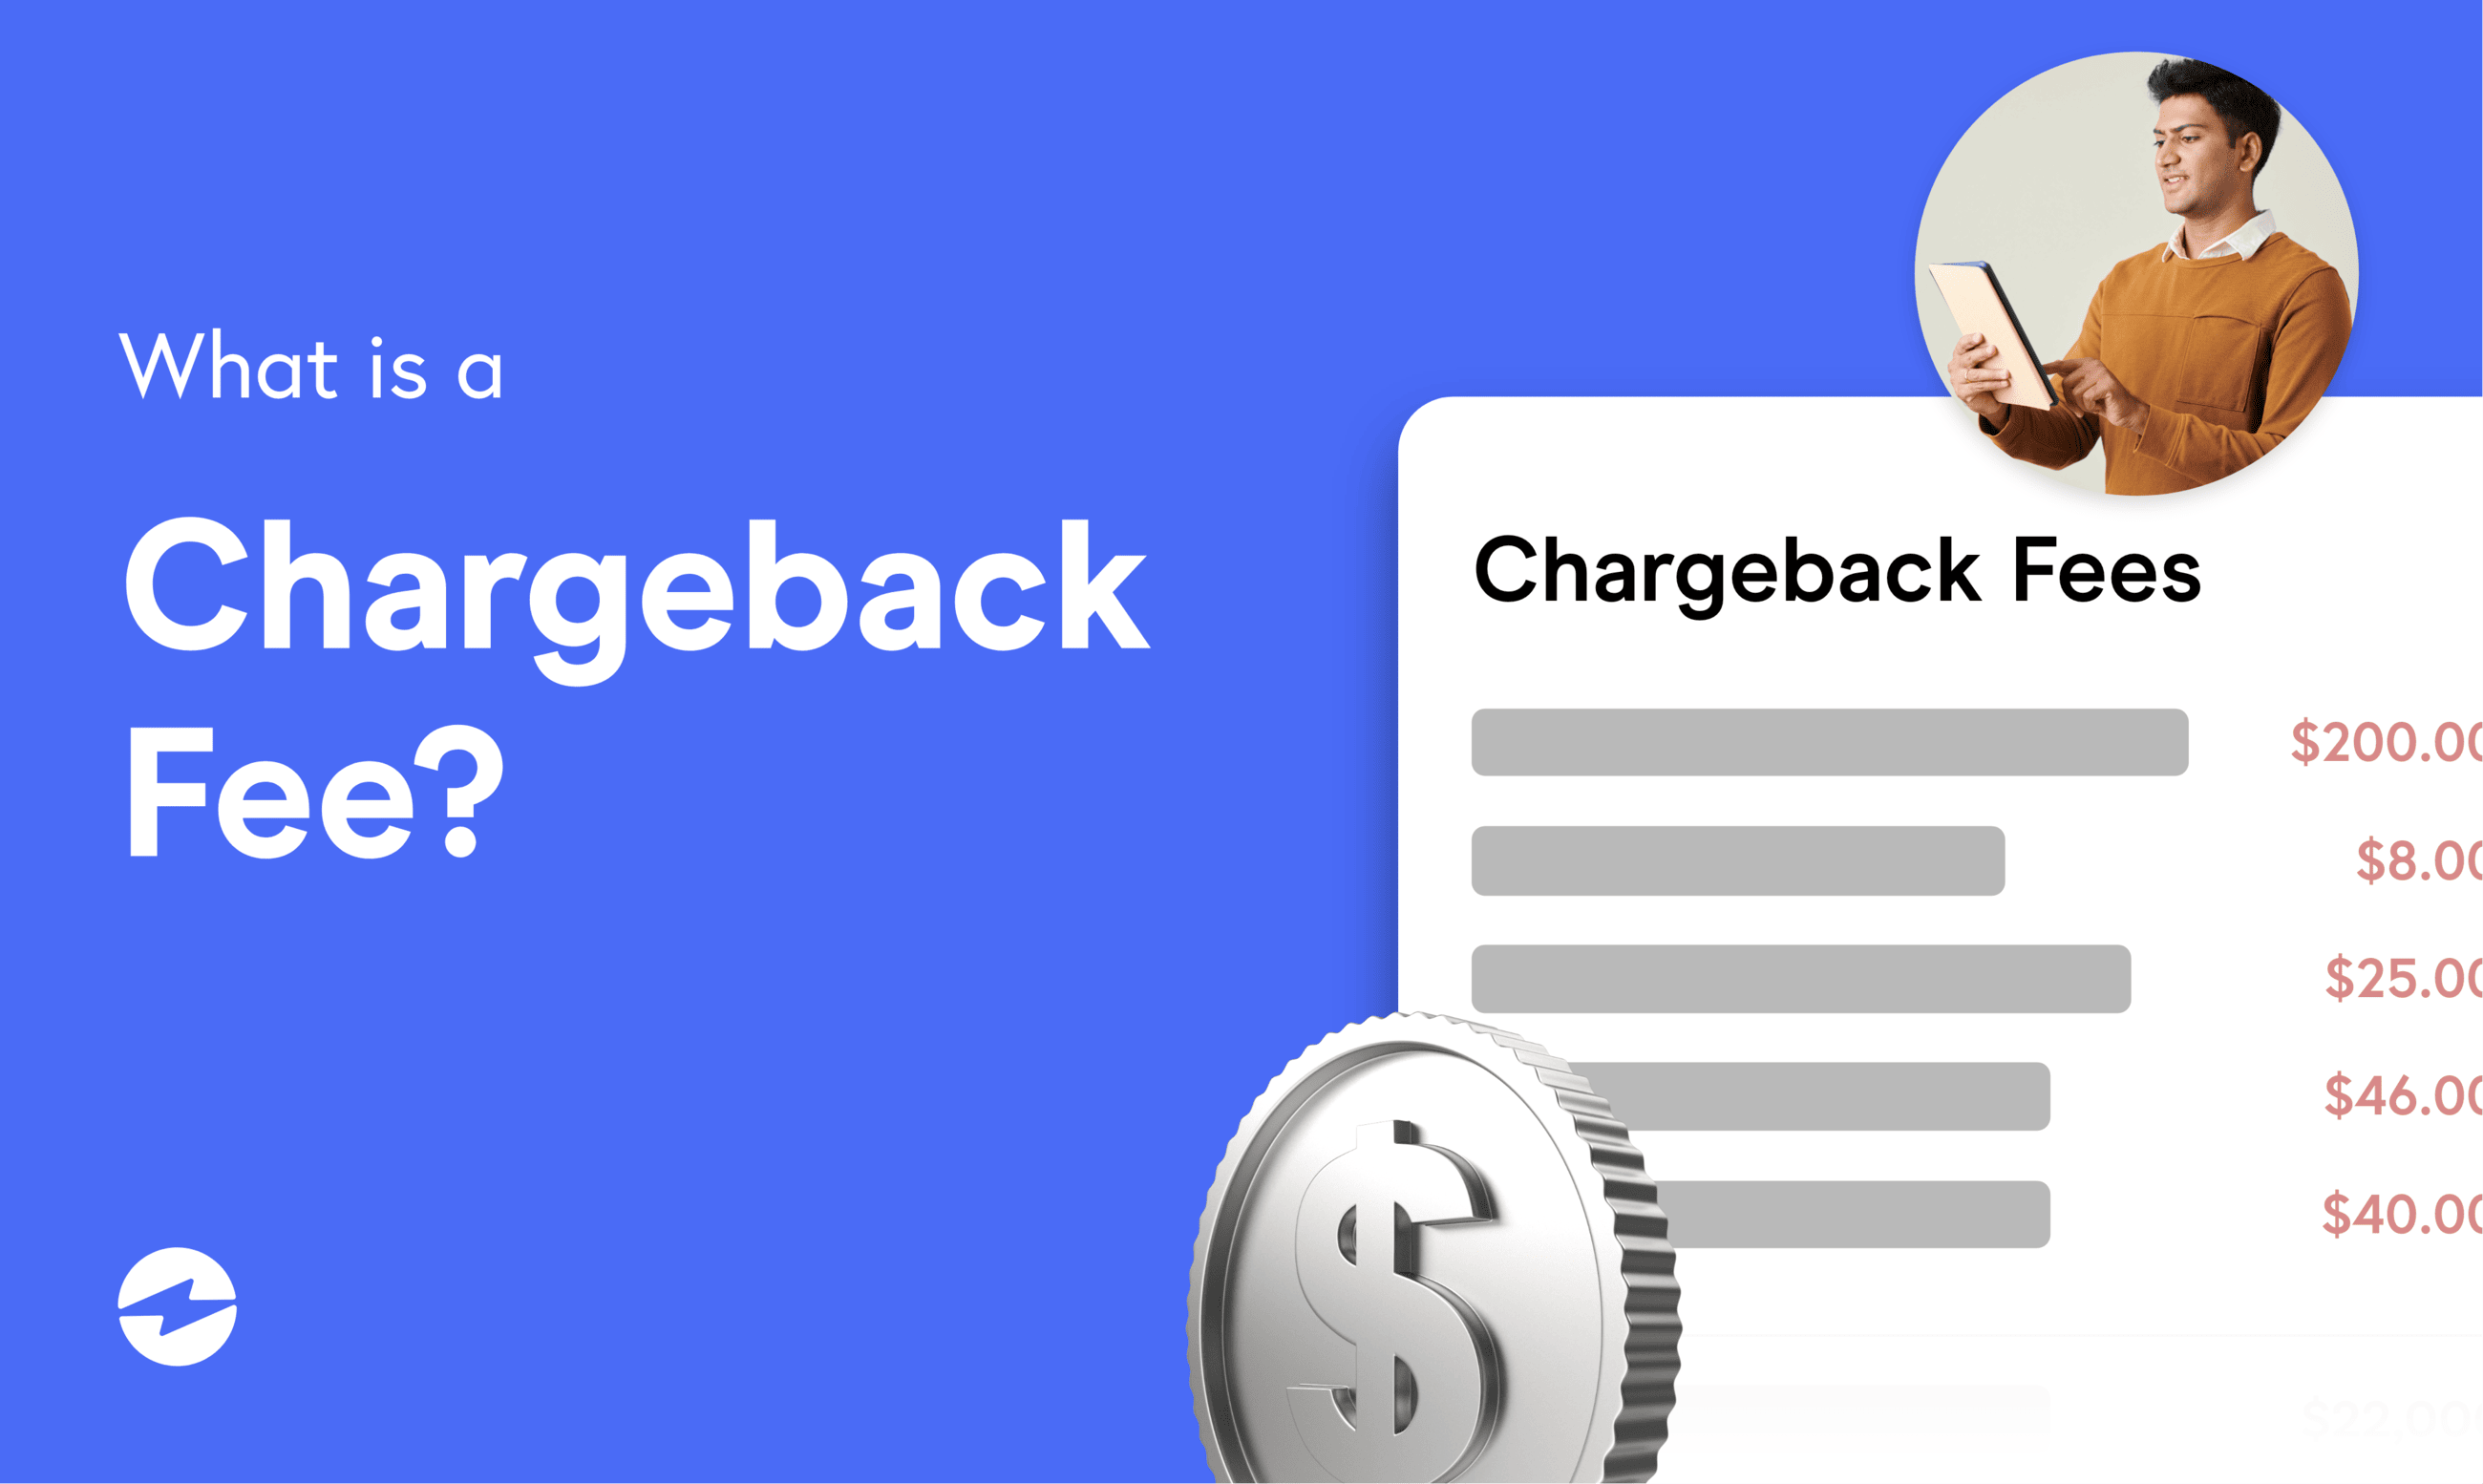 How much is a chargeback fee?